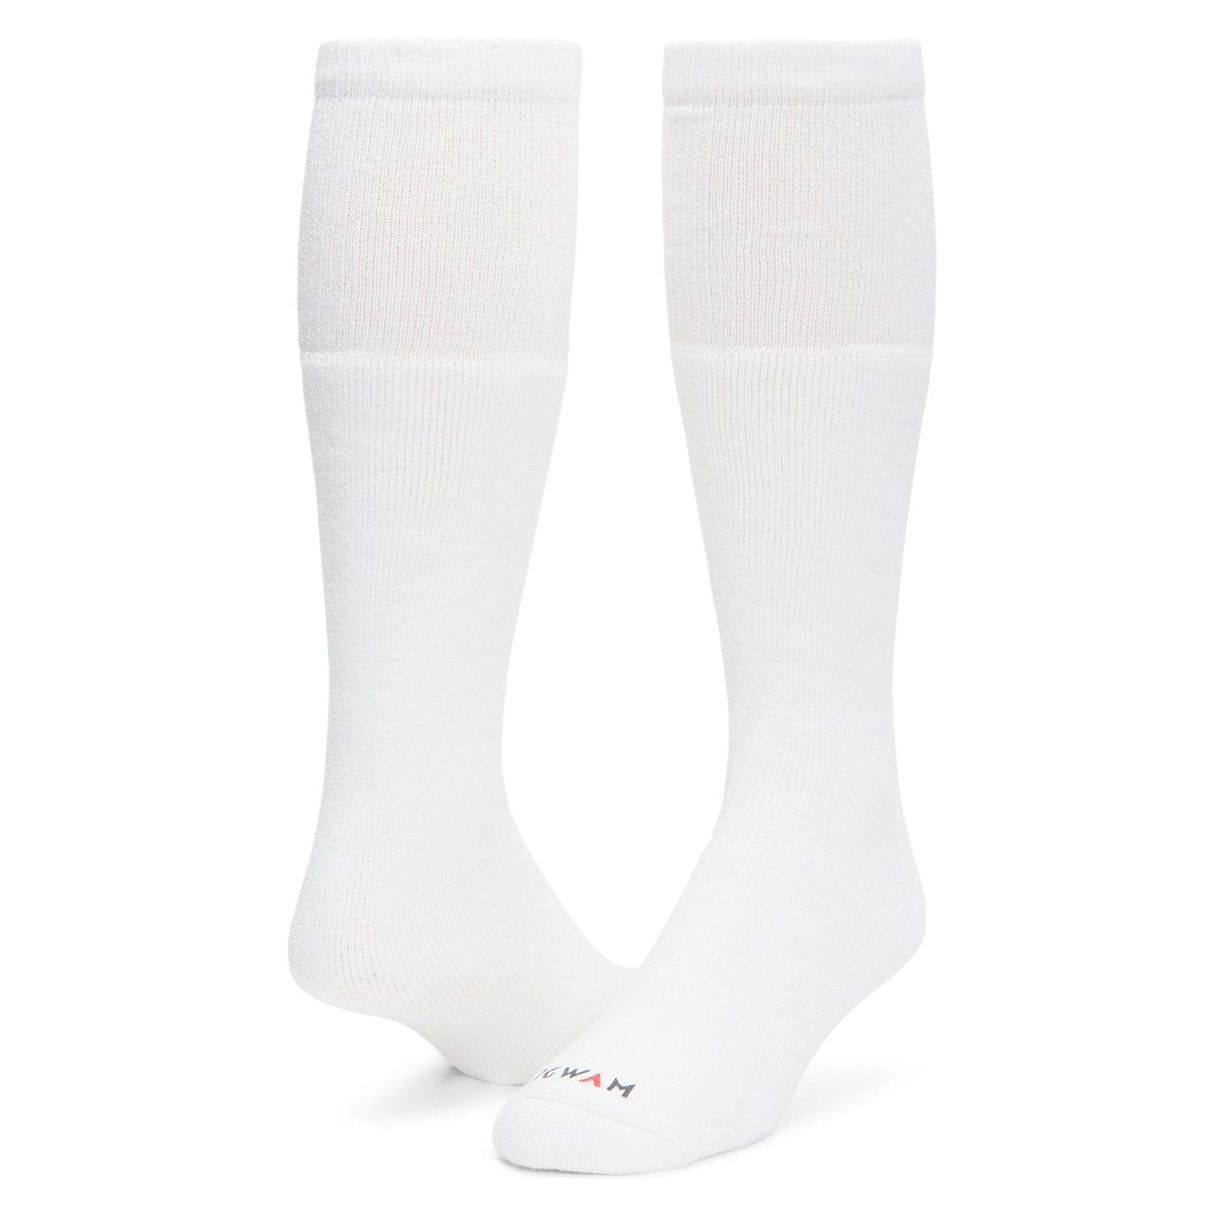 Wigwam Super 60 Tube Midweight Cotton 6-Pack Socks  -  One Size Fits Most / White